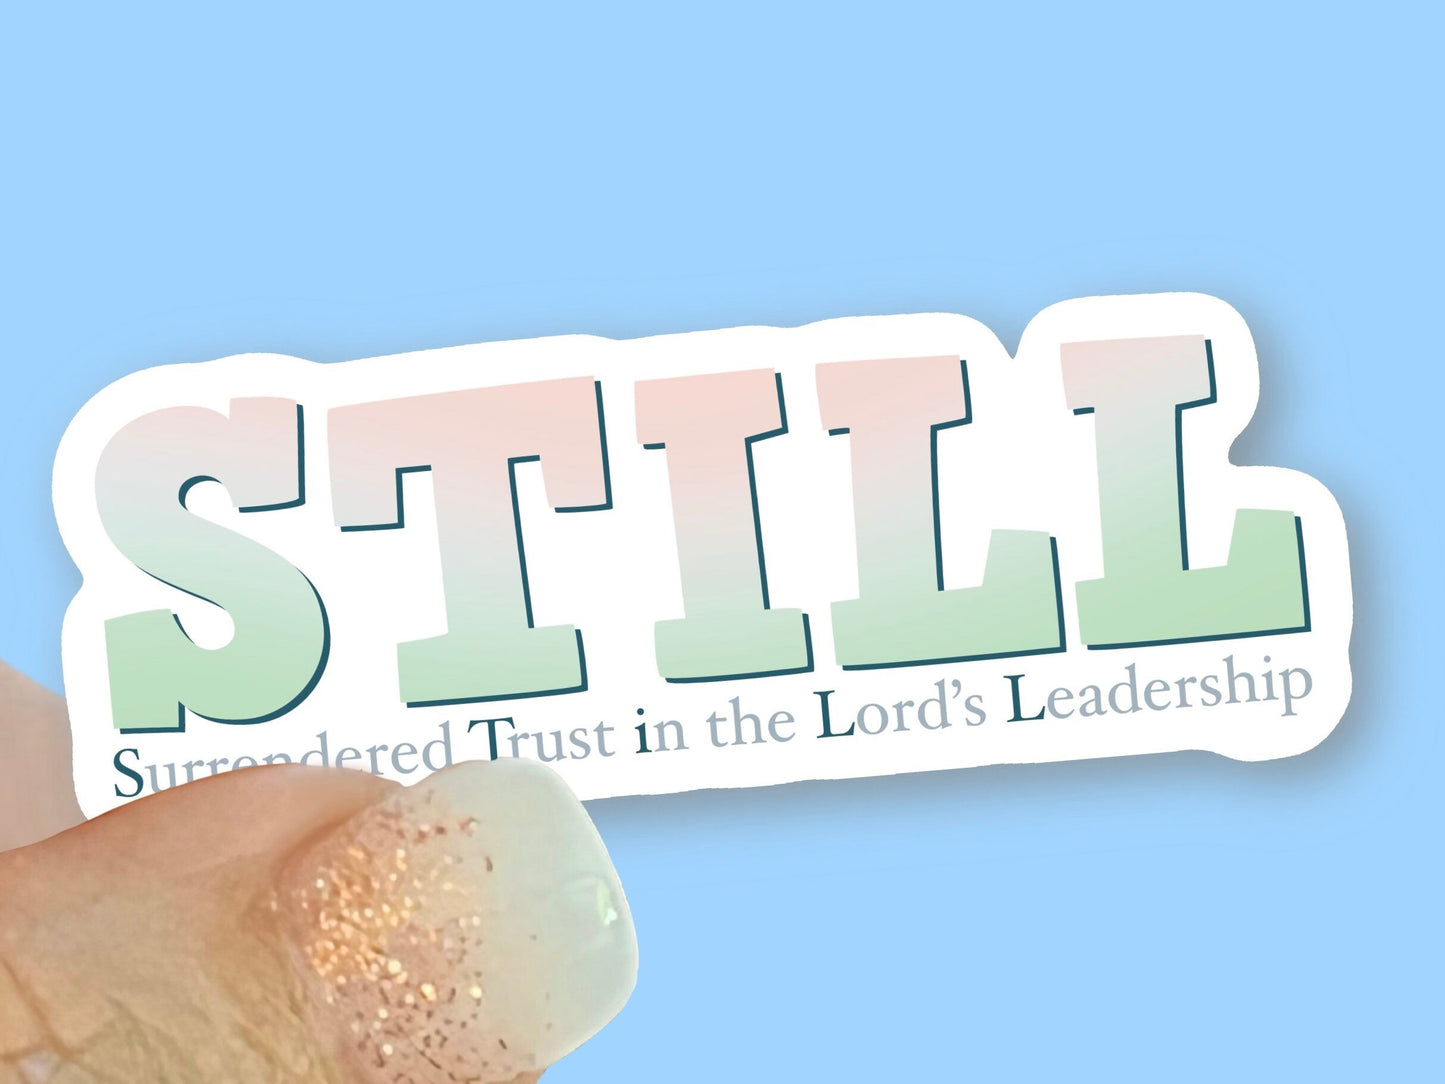 STILL - Surrendered Trust in the Lord's Leadership - Christian Faith Waterproof Vinyl Sticker/ Decal- Choice of Size